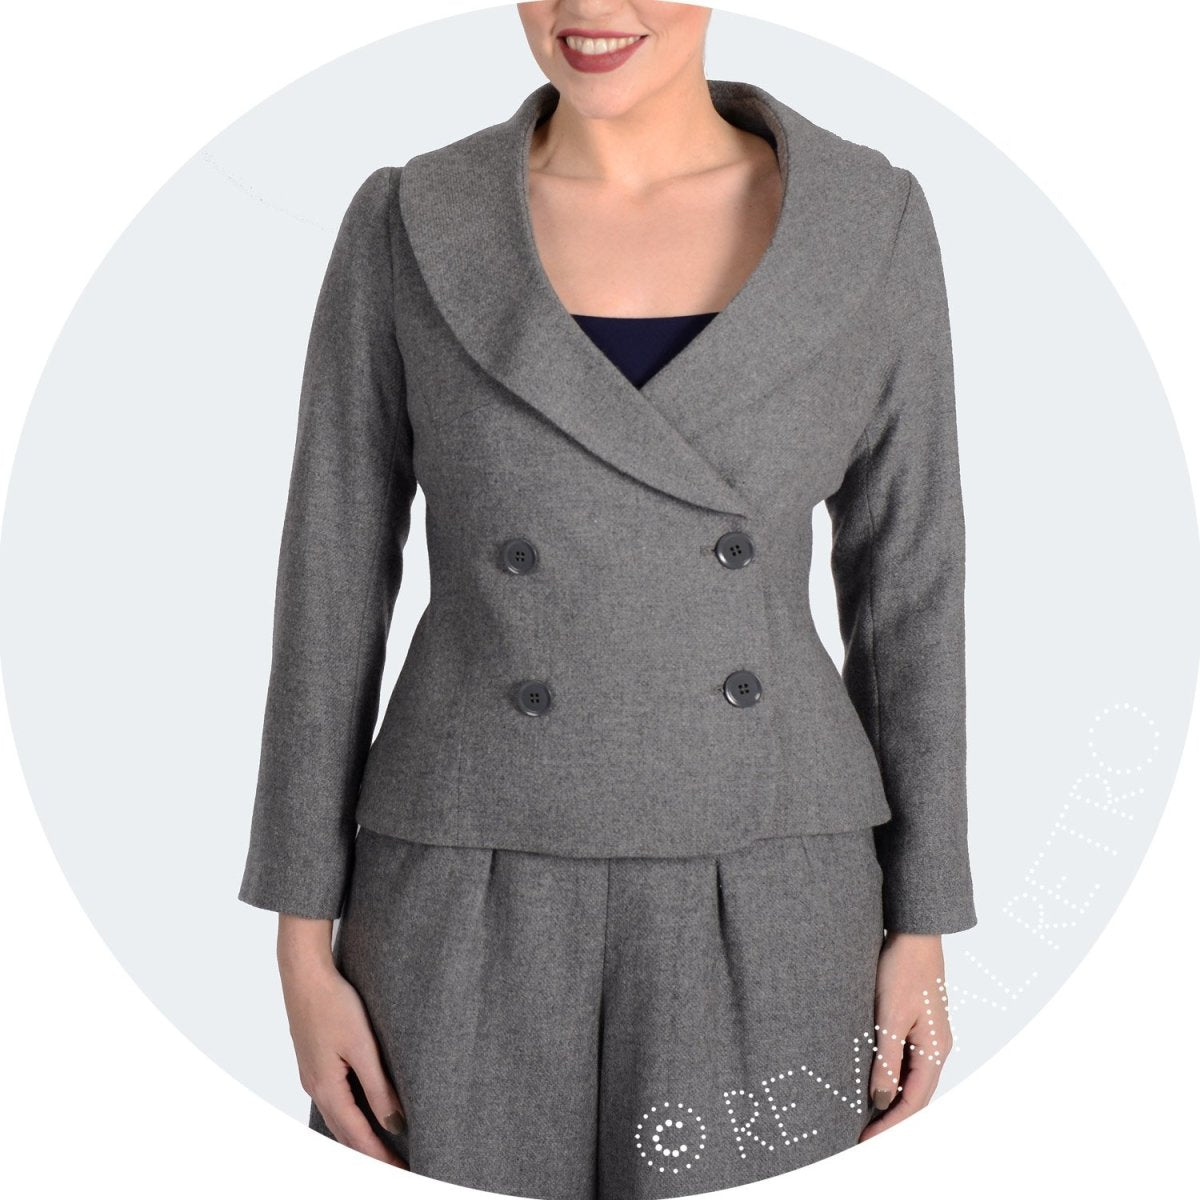 Womens double breasted suit jacket with shawl collar